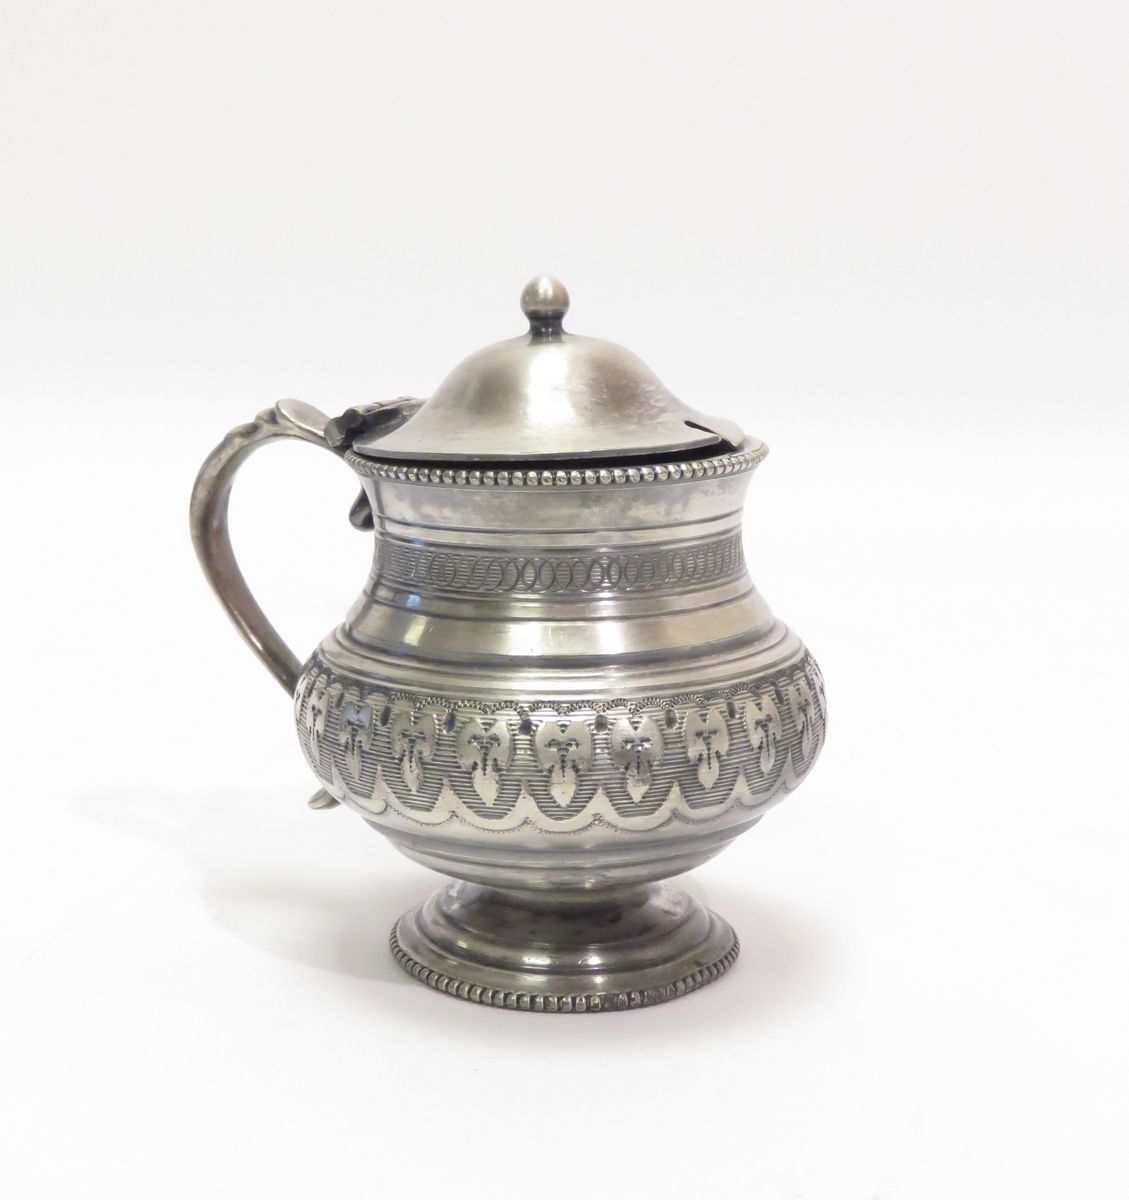 Null Pewter mustard pot (receptacle missing). 9 x 9.5 cm. As is.